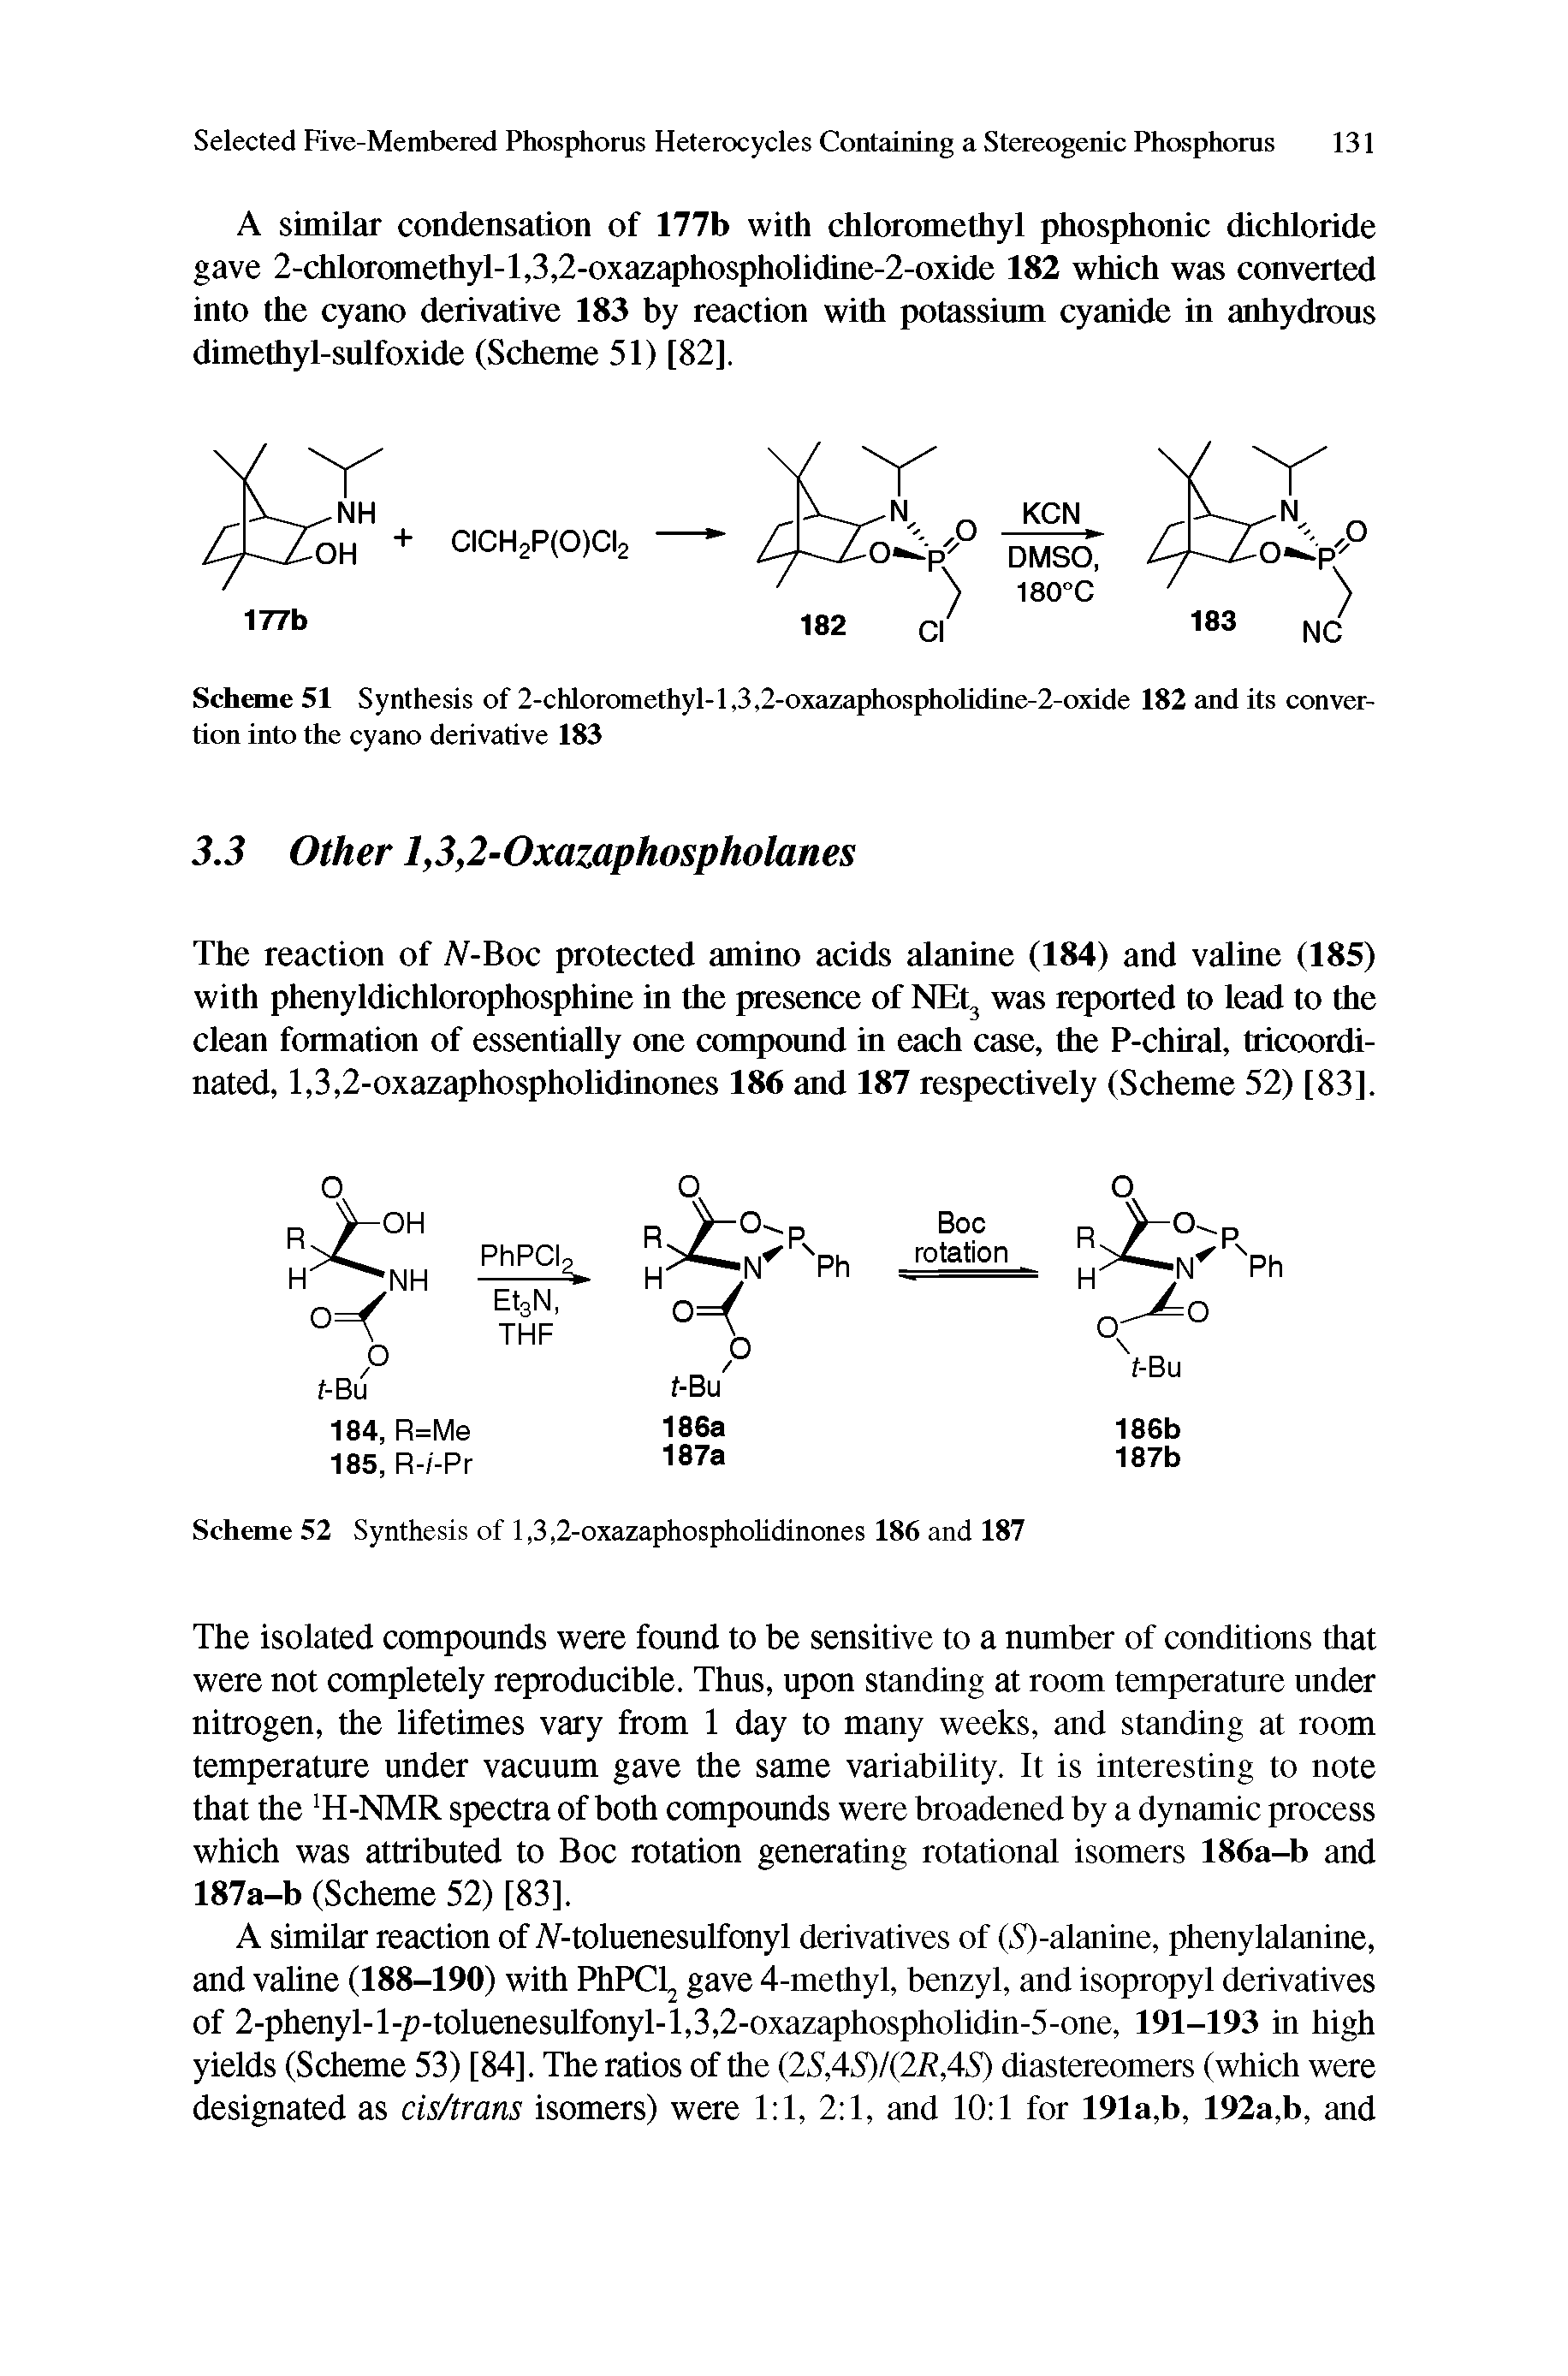 Scheme 51 Synthesis of 2-chloromethyl-l,3.2-oxazaphospholidine-2-oxide 182 and its conver-tion into the cyano derivative 183...